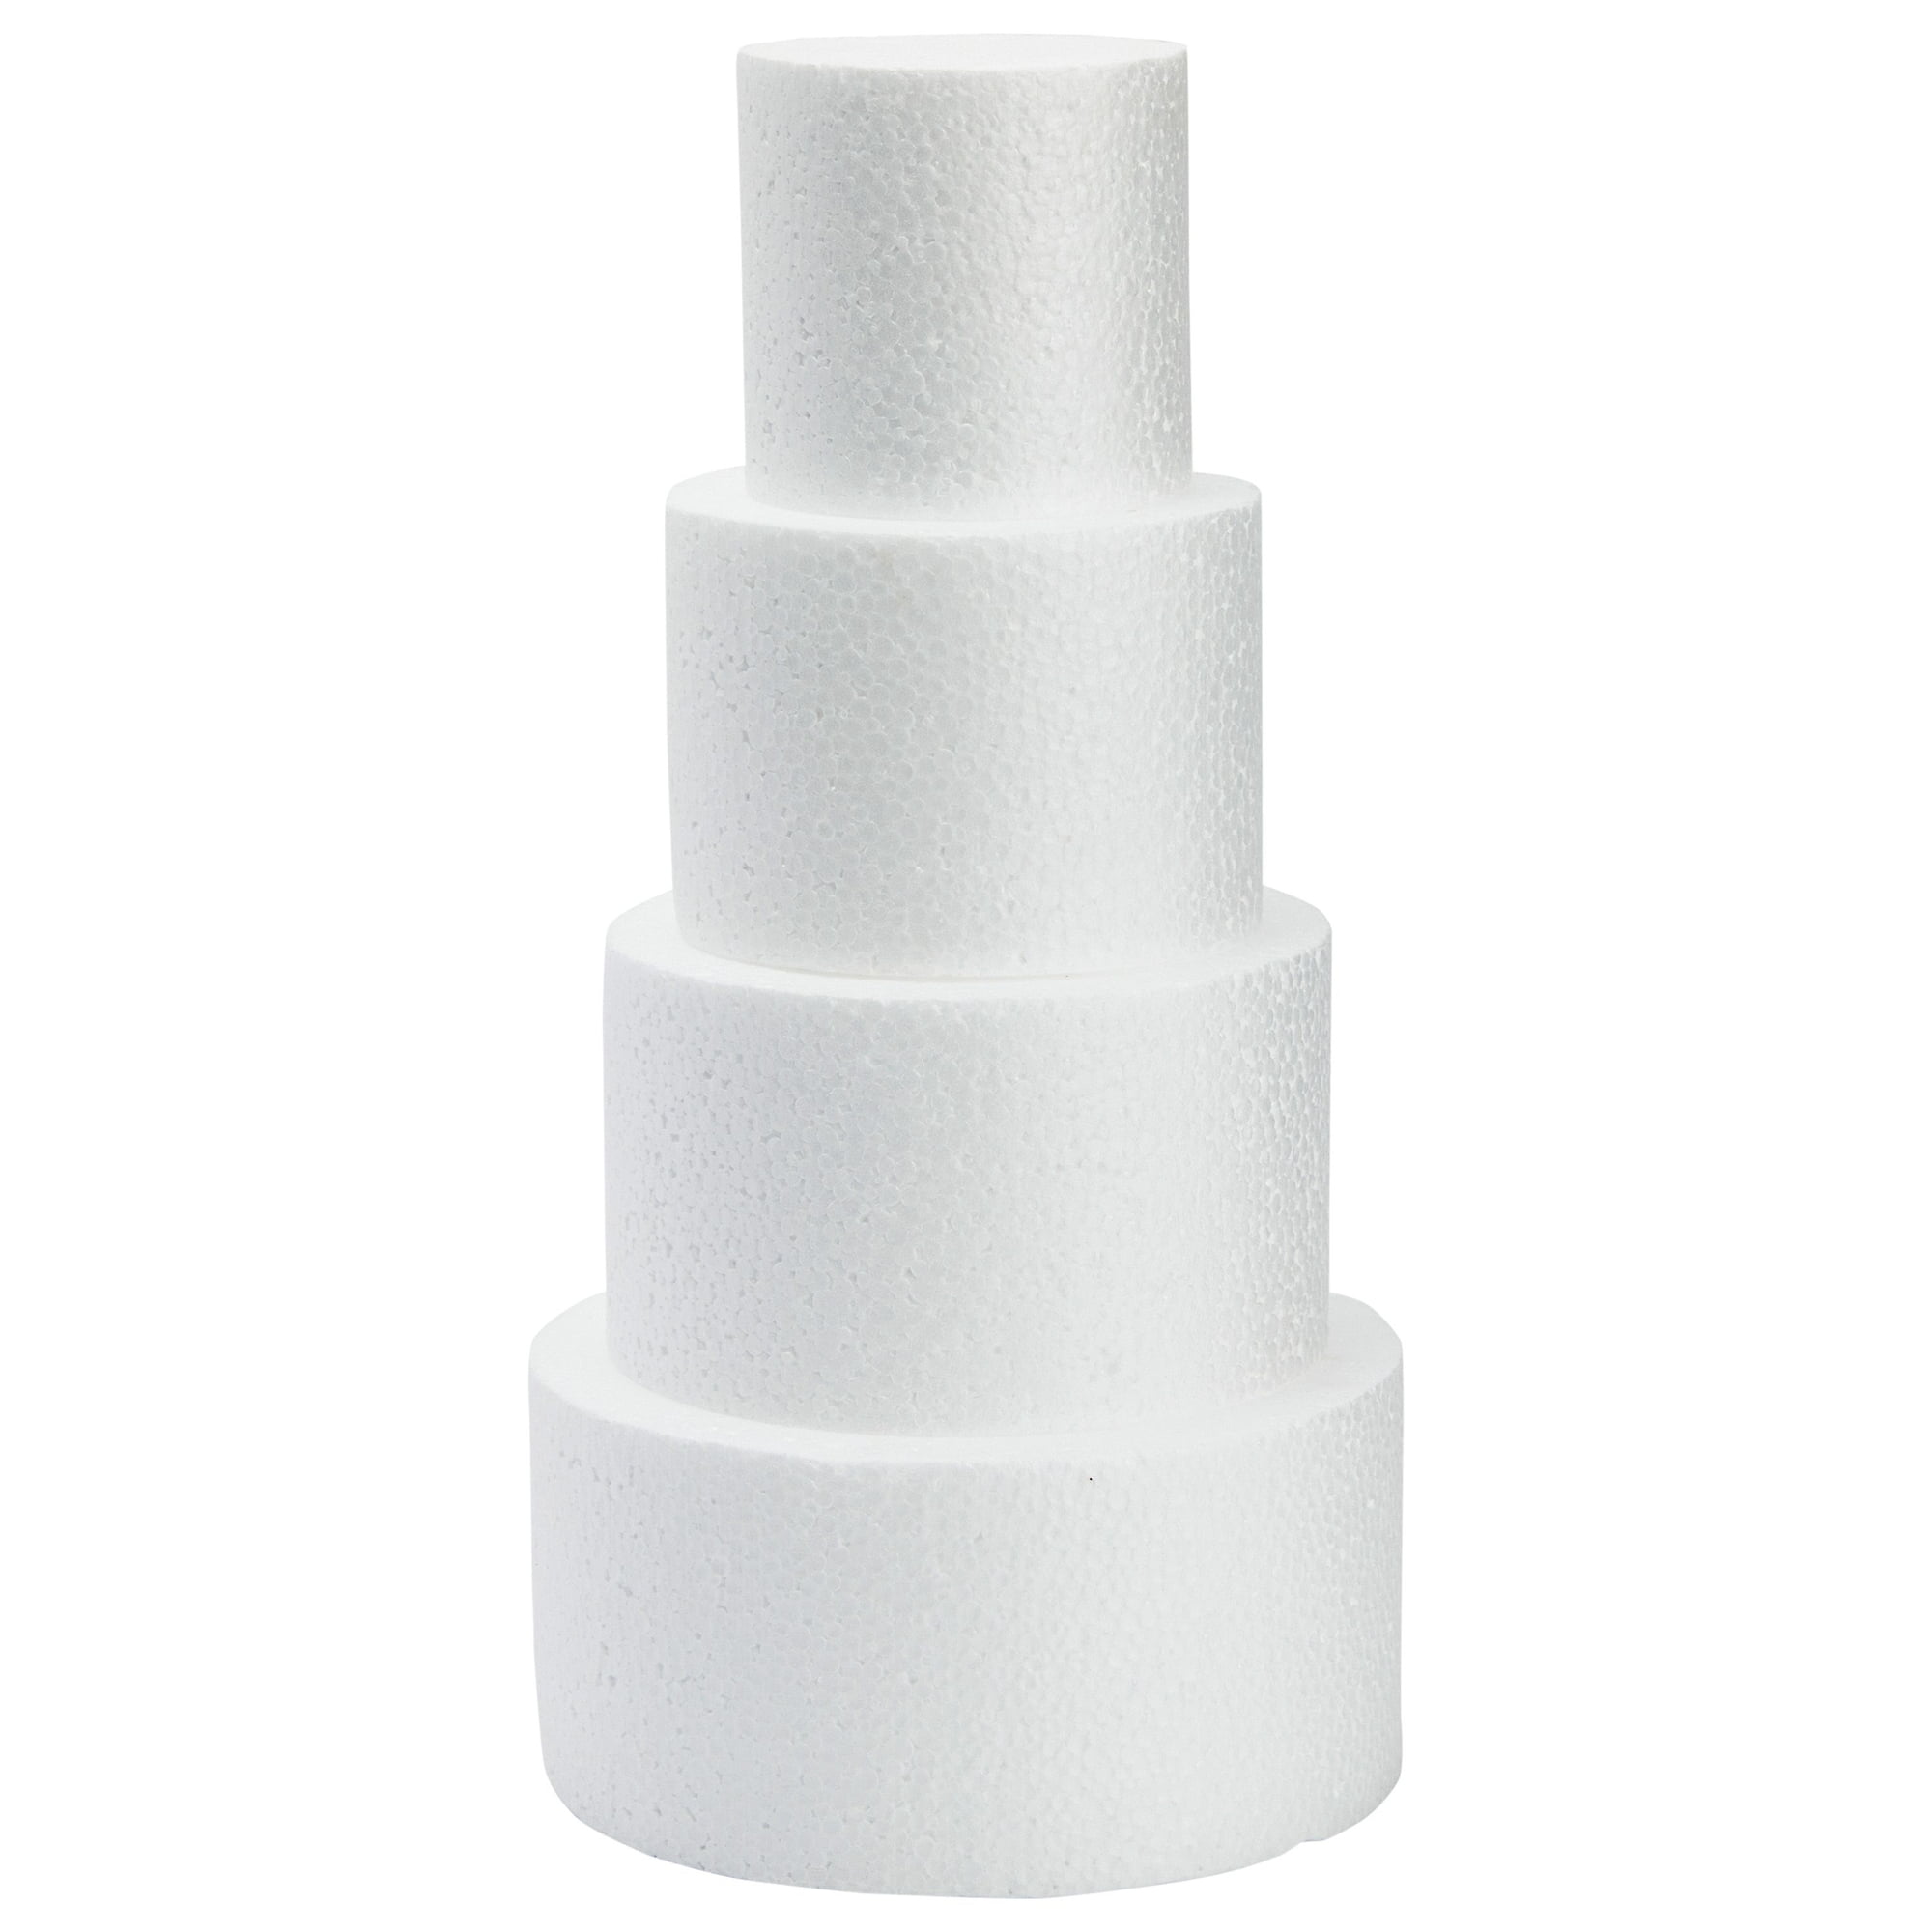 Set of 4 Round Foam Cake Dummies in Varying Sizes for 16 Tall Fake Wedding  Cake (6, 8, 10, and 12 in)